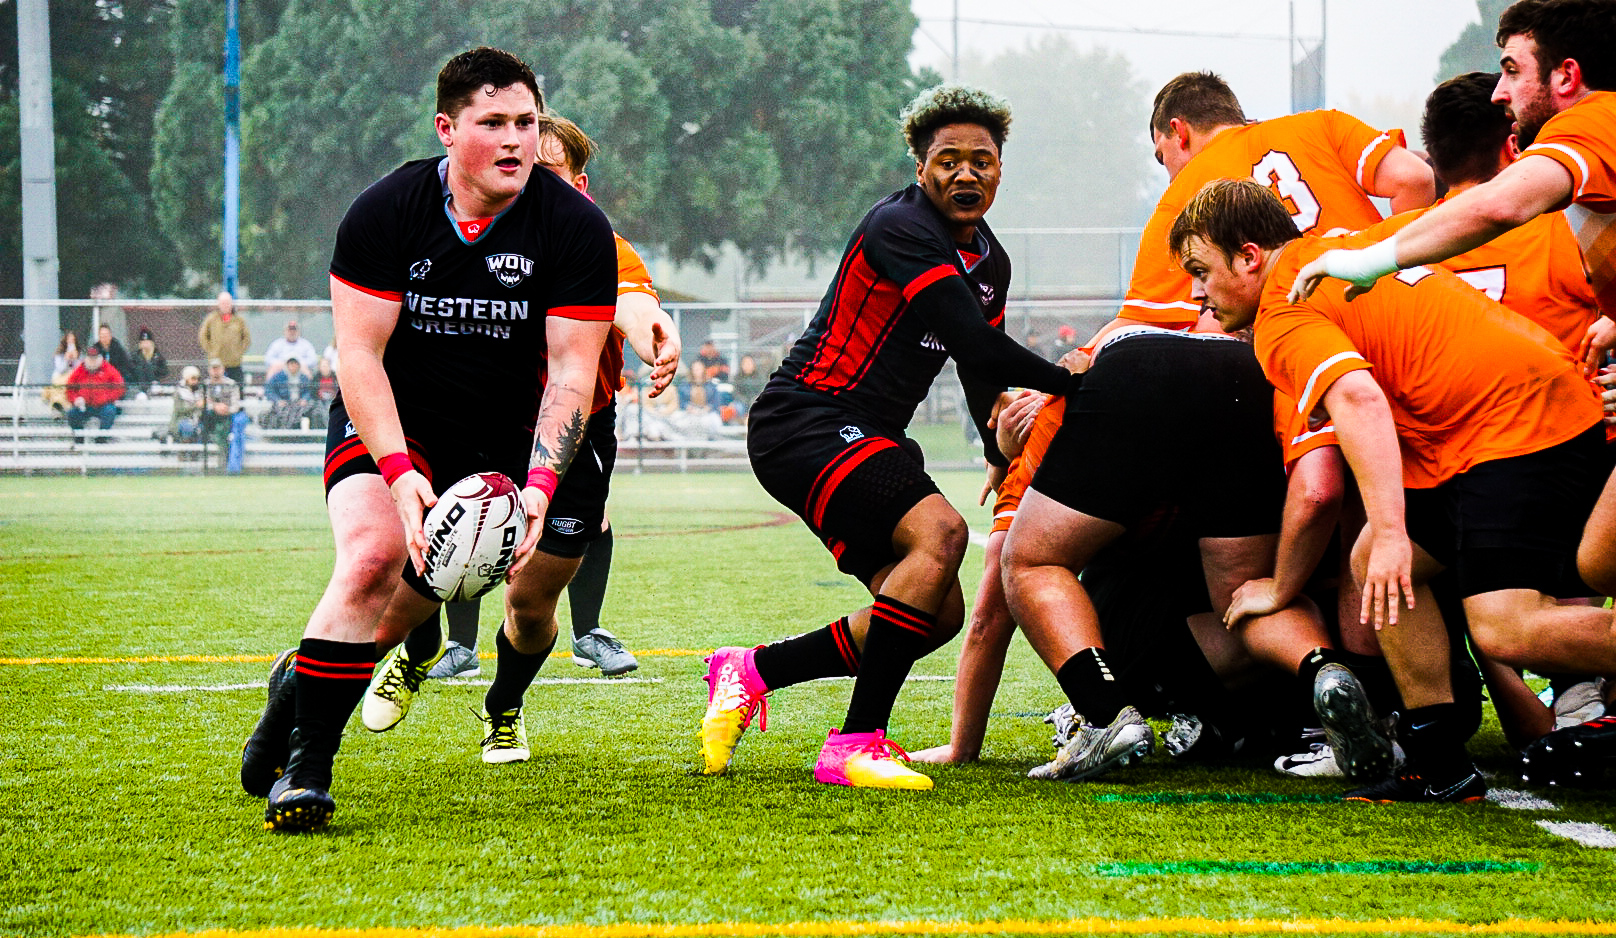 Knock knock, Men’s Rugby team knocking down doors to reach new endgame, bringing home a win against Oregon State University